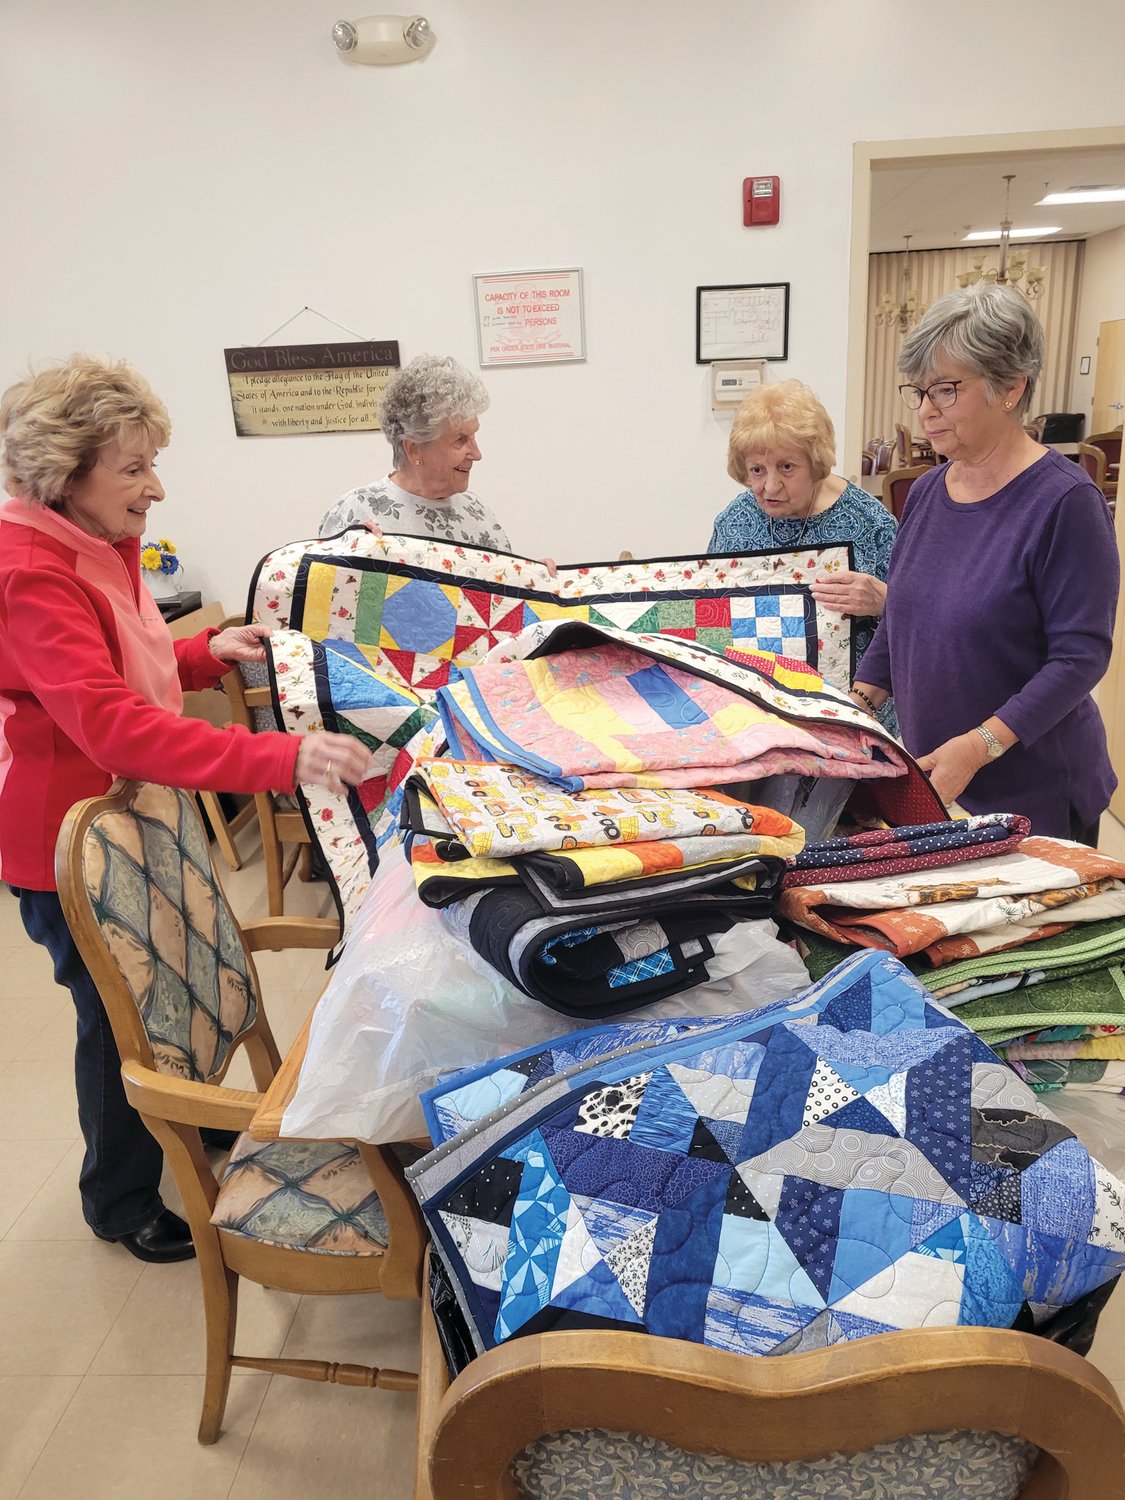 KEEP WARM: Members of the Giving Quilt Group at the Johnston Senior Center, from left to right, Betty Bryda, Evelyn Cedroni, Marie Lanzi and Fran Zanni prepare their quilts, which have been donated to Children’s Friend and Services, for families in need.